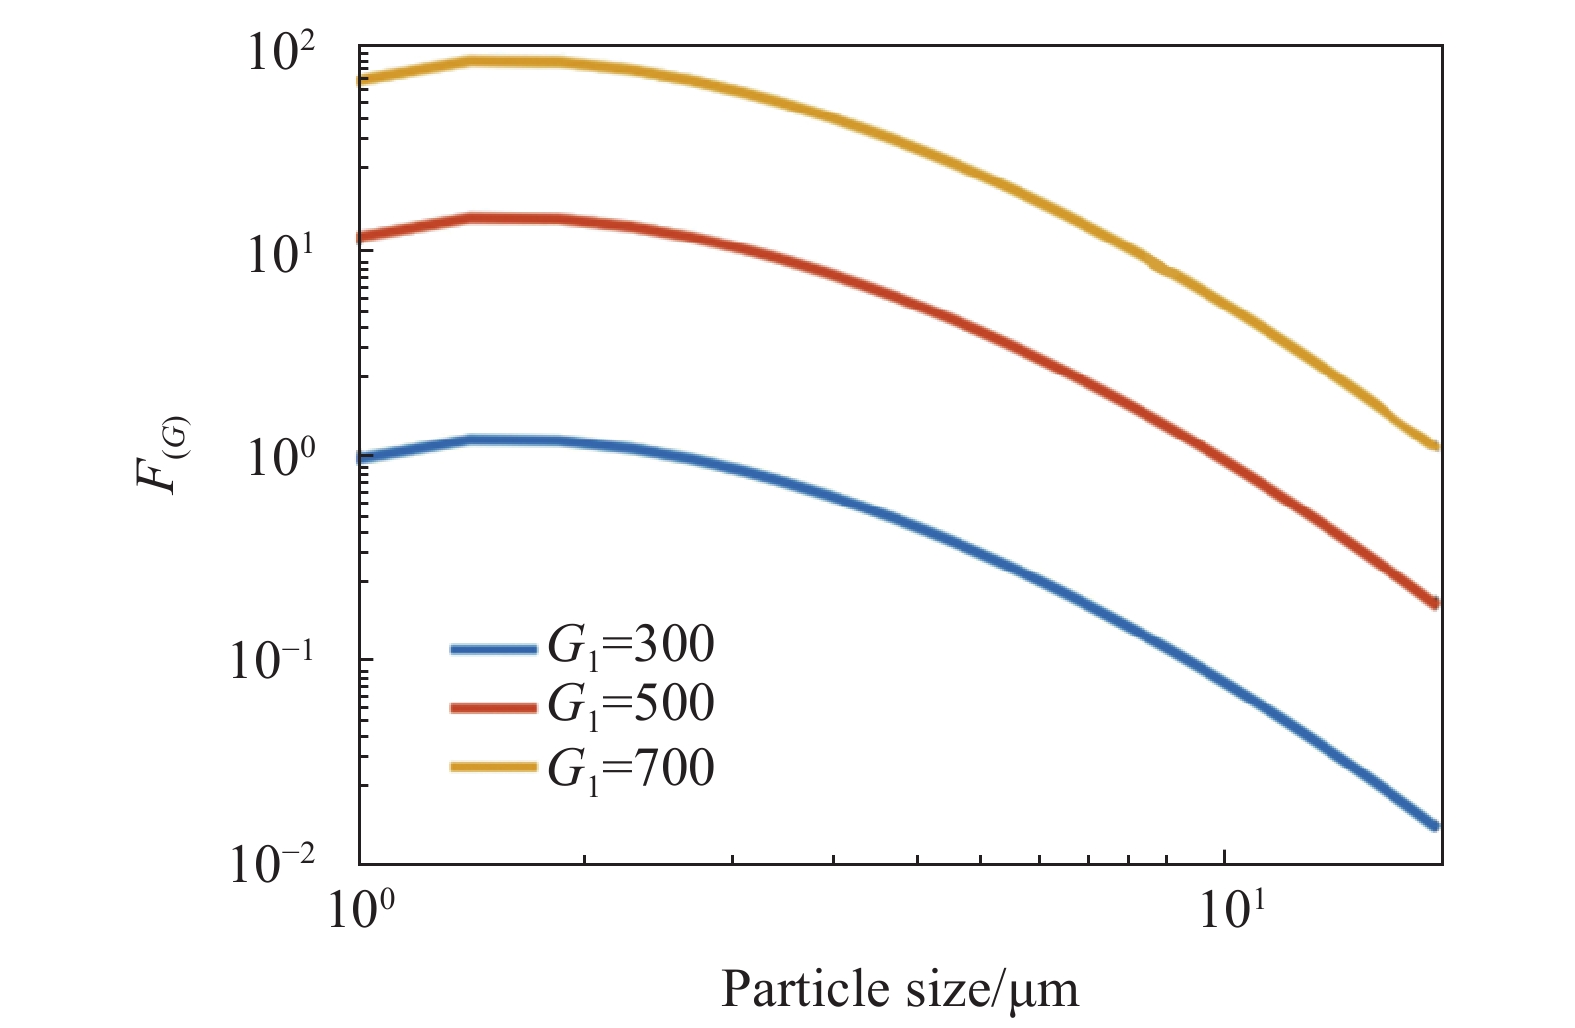 Particle distribution with different surface cleanliness in the mirror surface